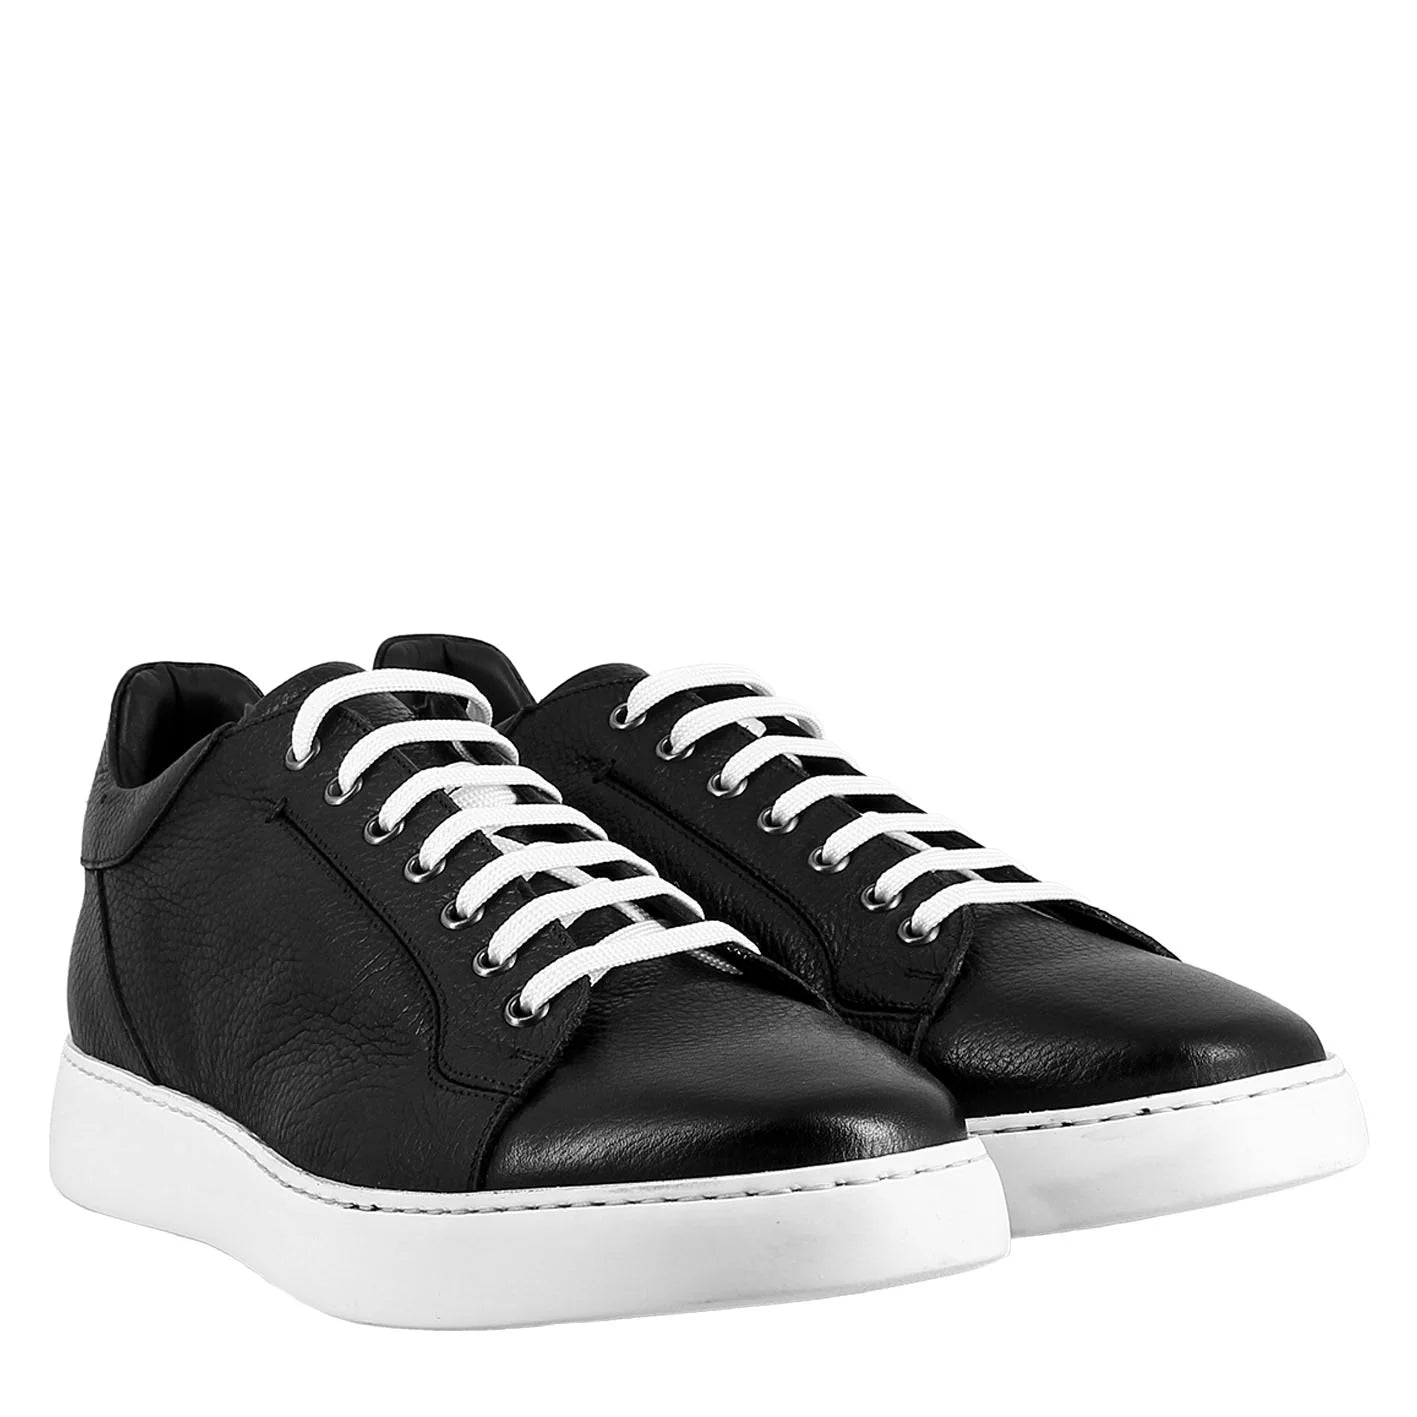 Black sneaker in smooth leather